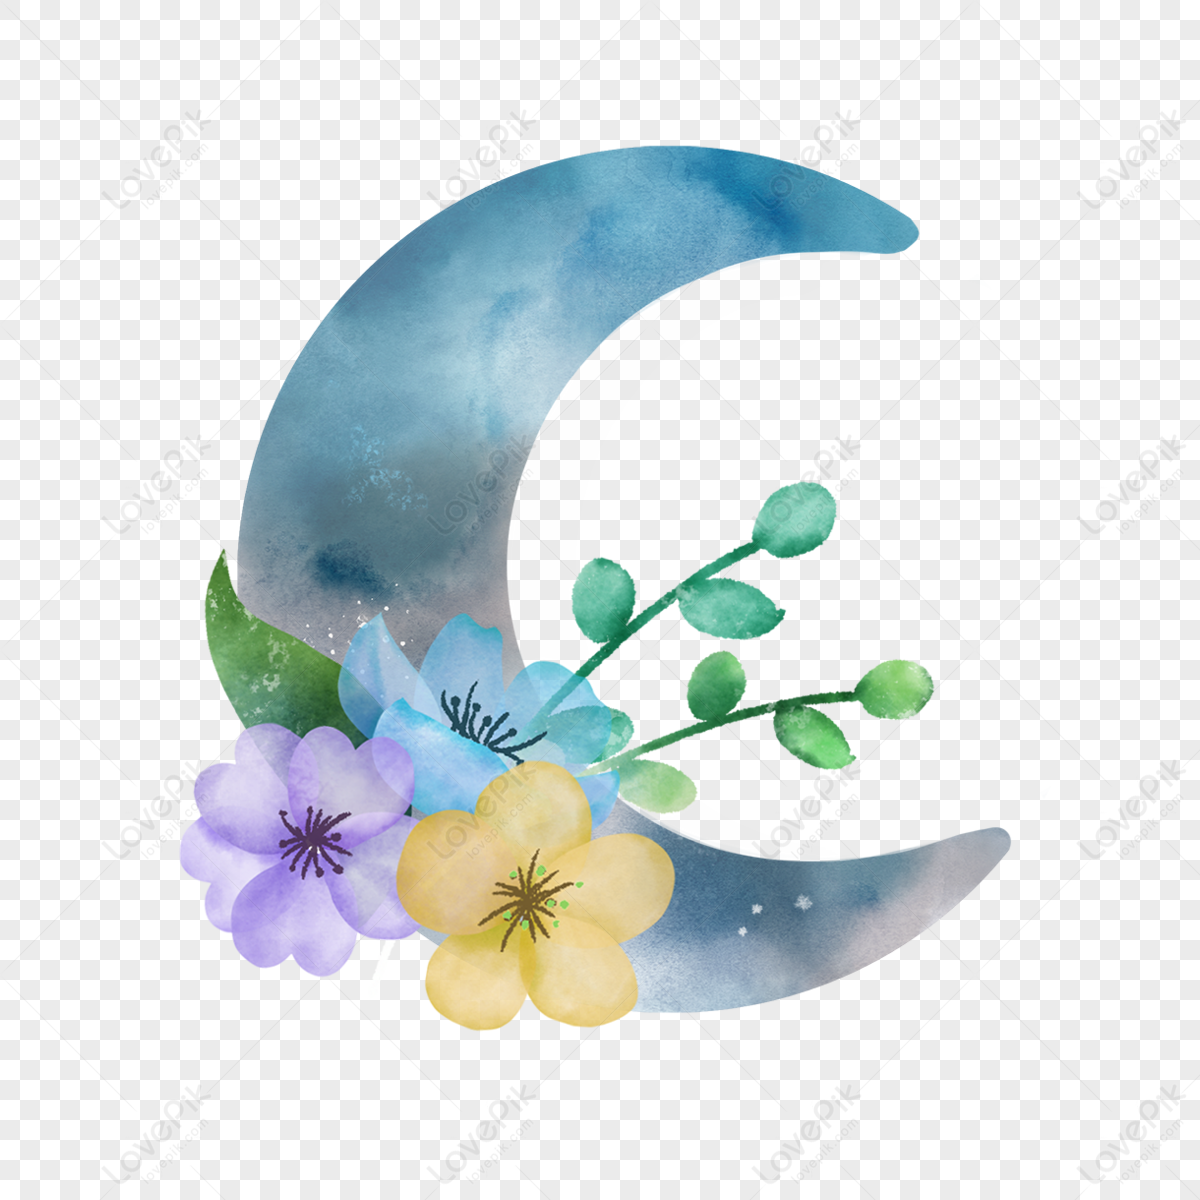 Half Moon Flower PNG Picture, Half Moon And Star Flower Yellow, Moon, Half,  Flower PNG Image For Free Download